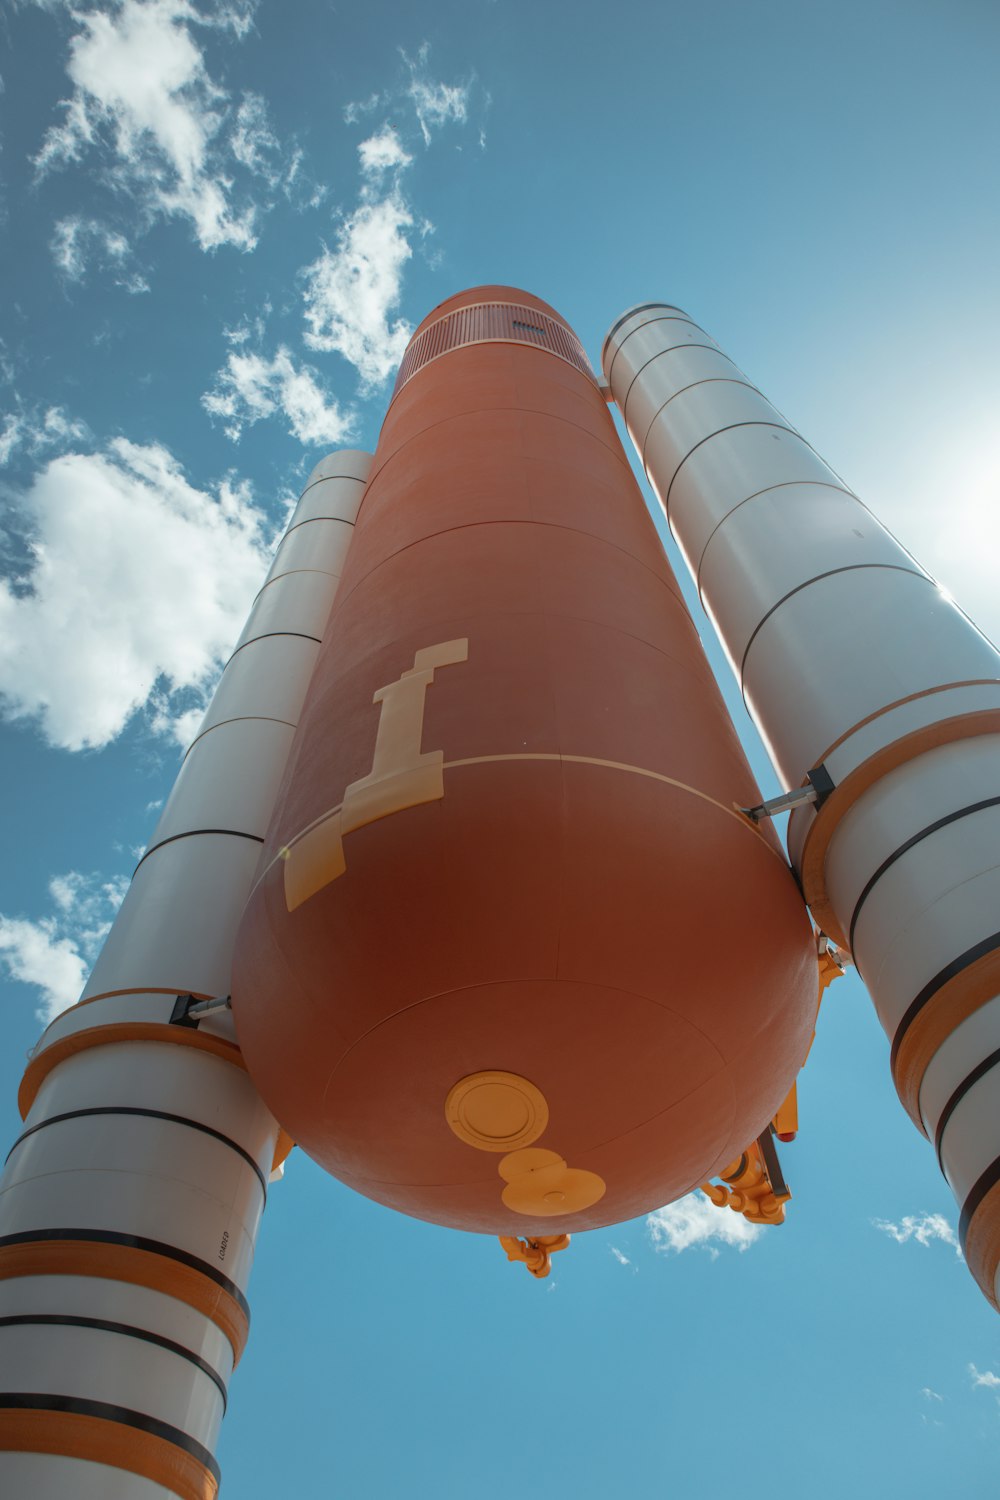 a large orange and white object with a sky background